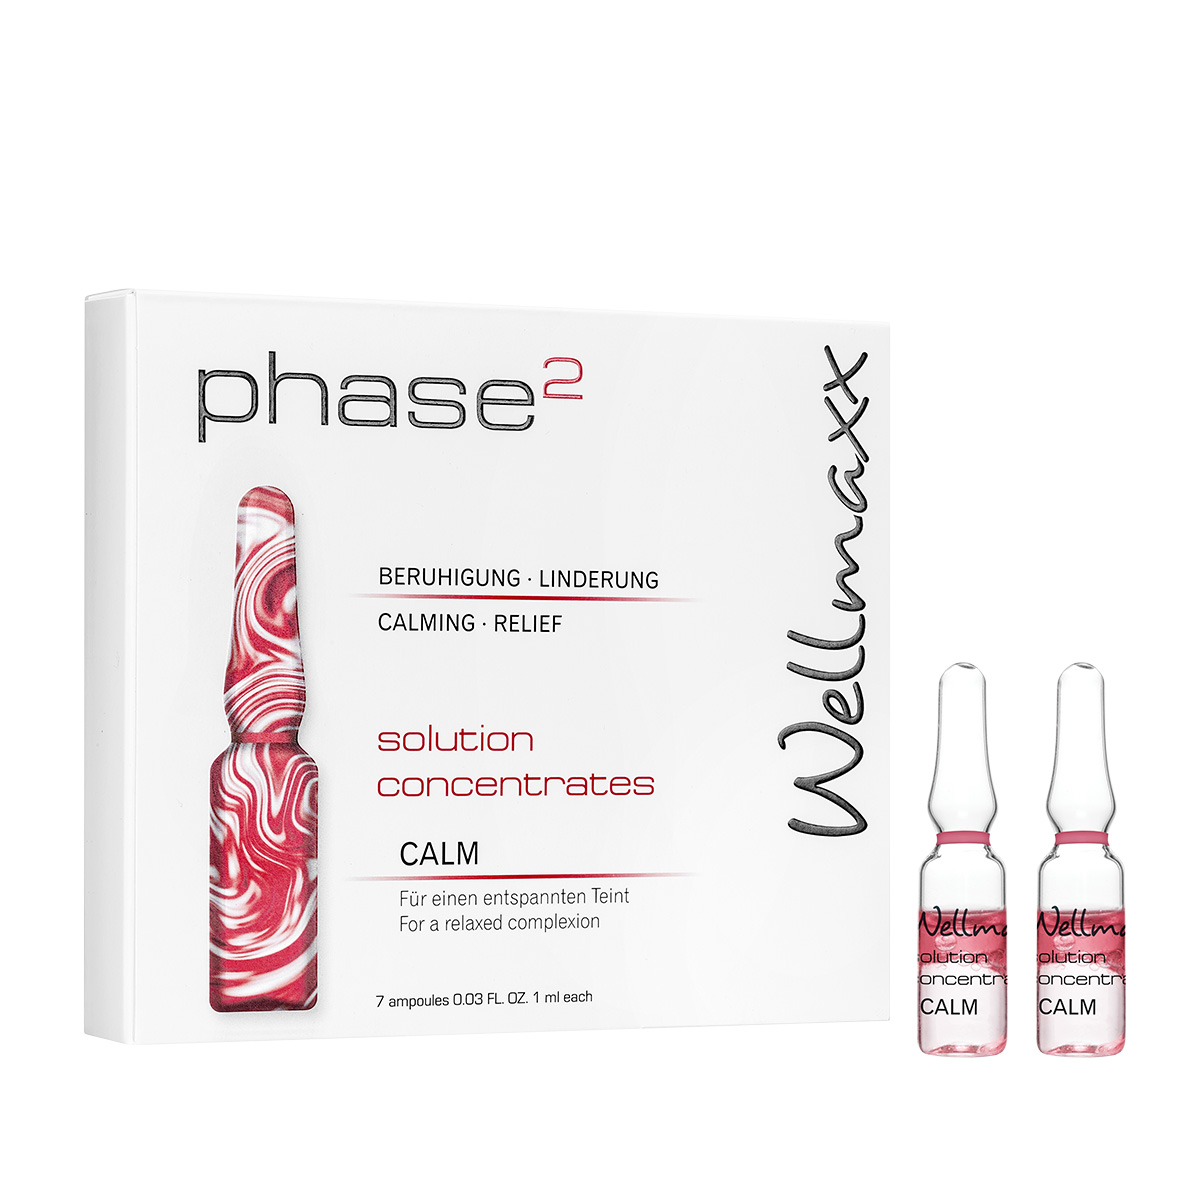 WELLMAXX - phase² solution concentrate CALM 7x1ml - 2